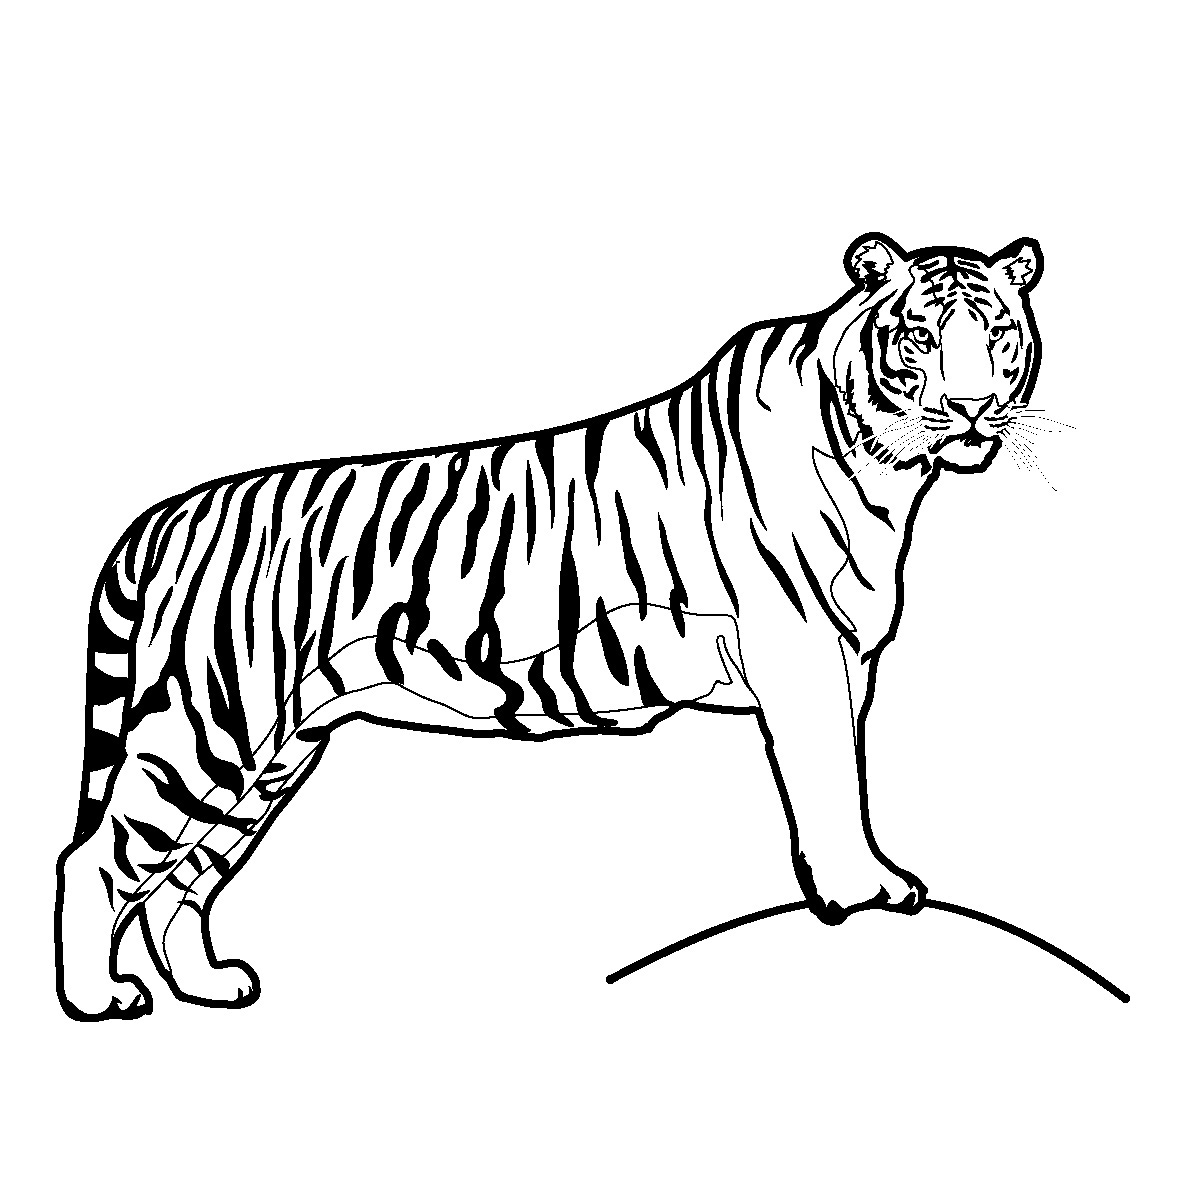 Baby tiger clip art baby animals tiger free clipart images